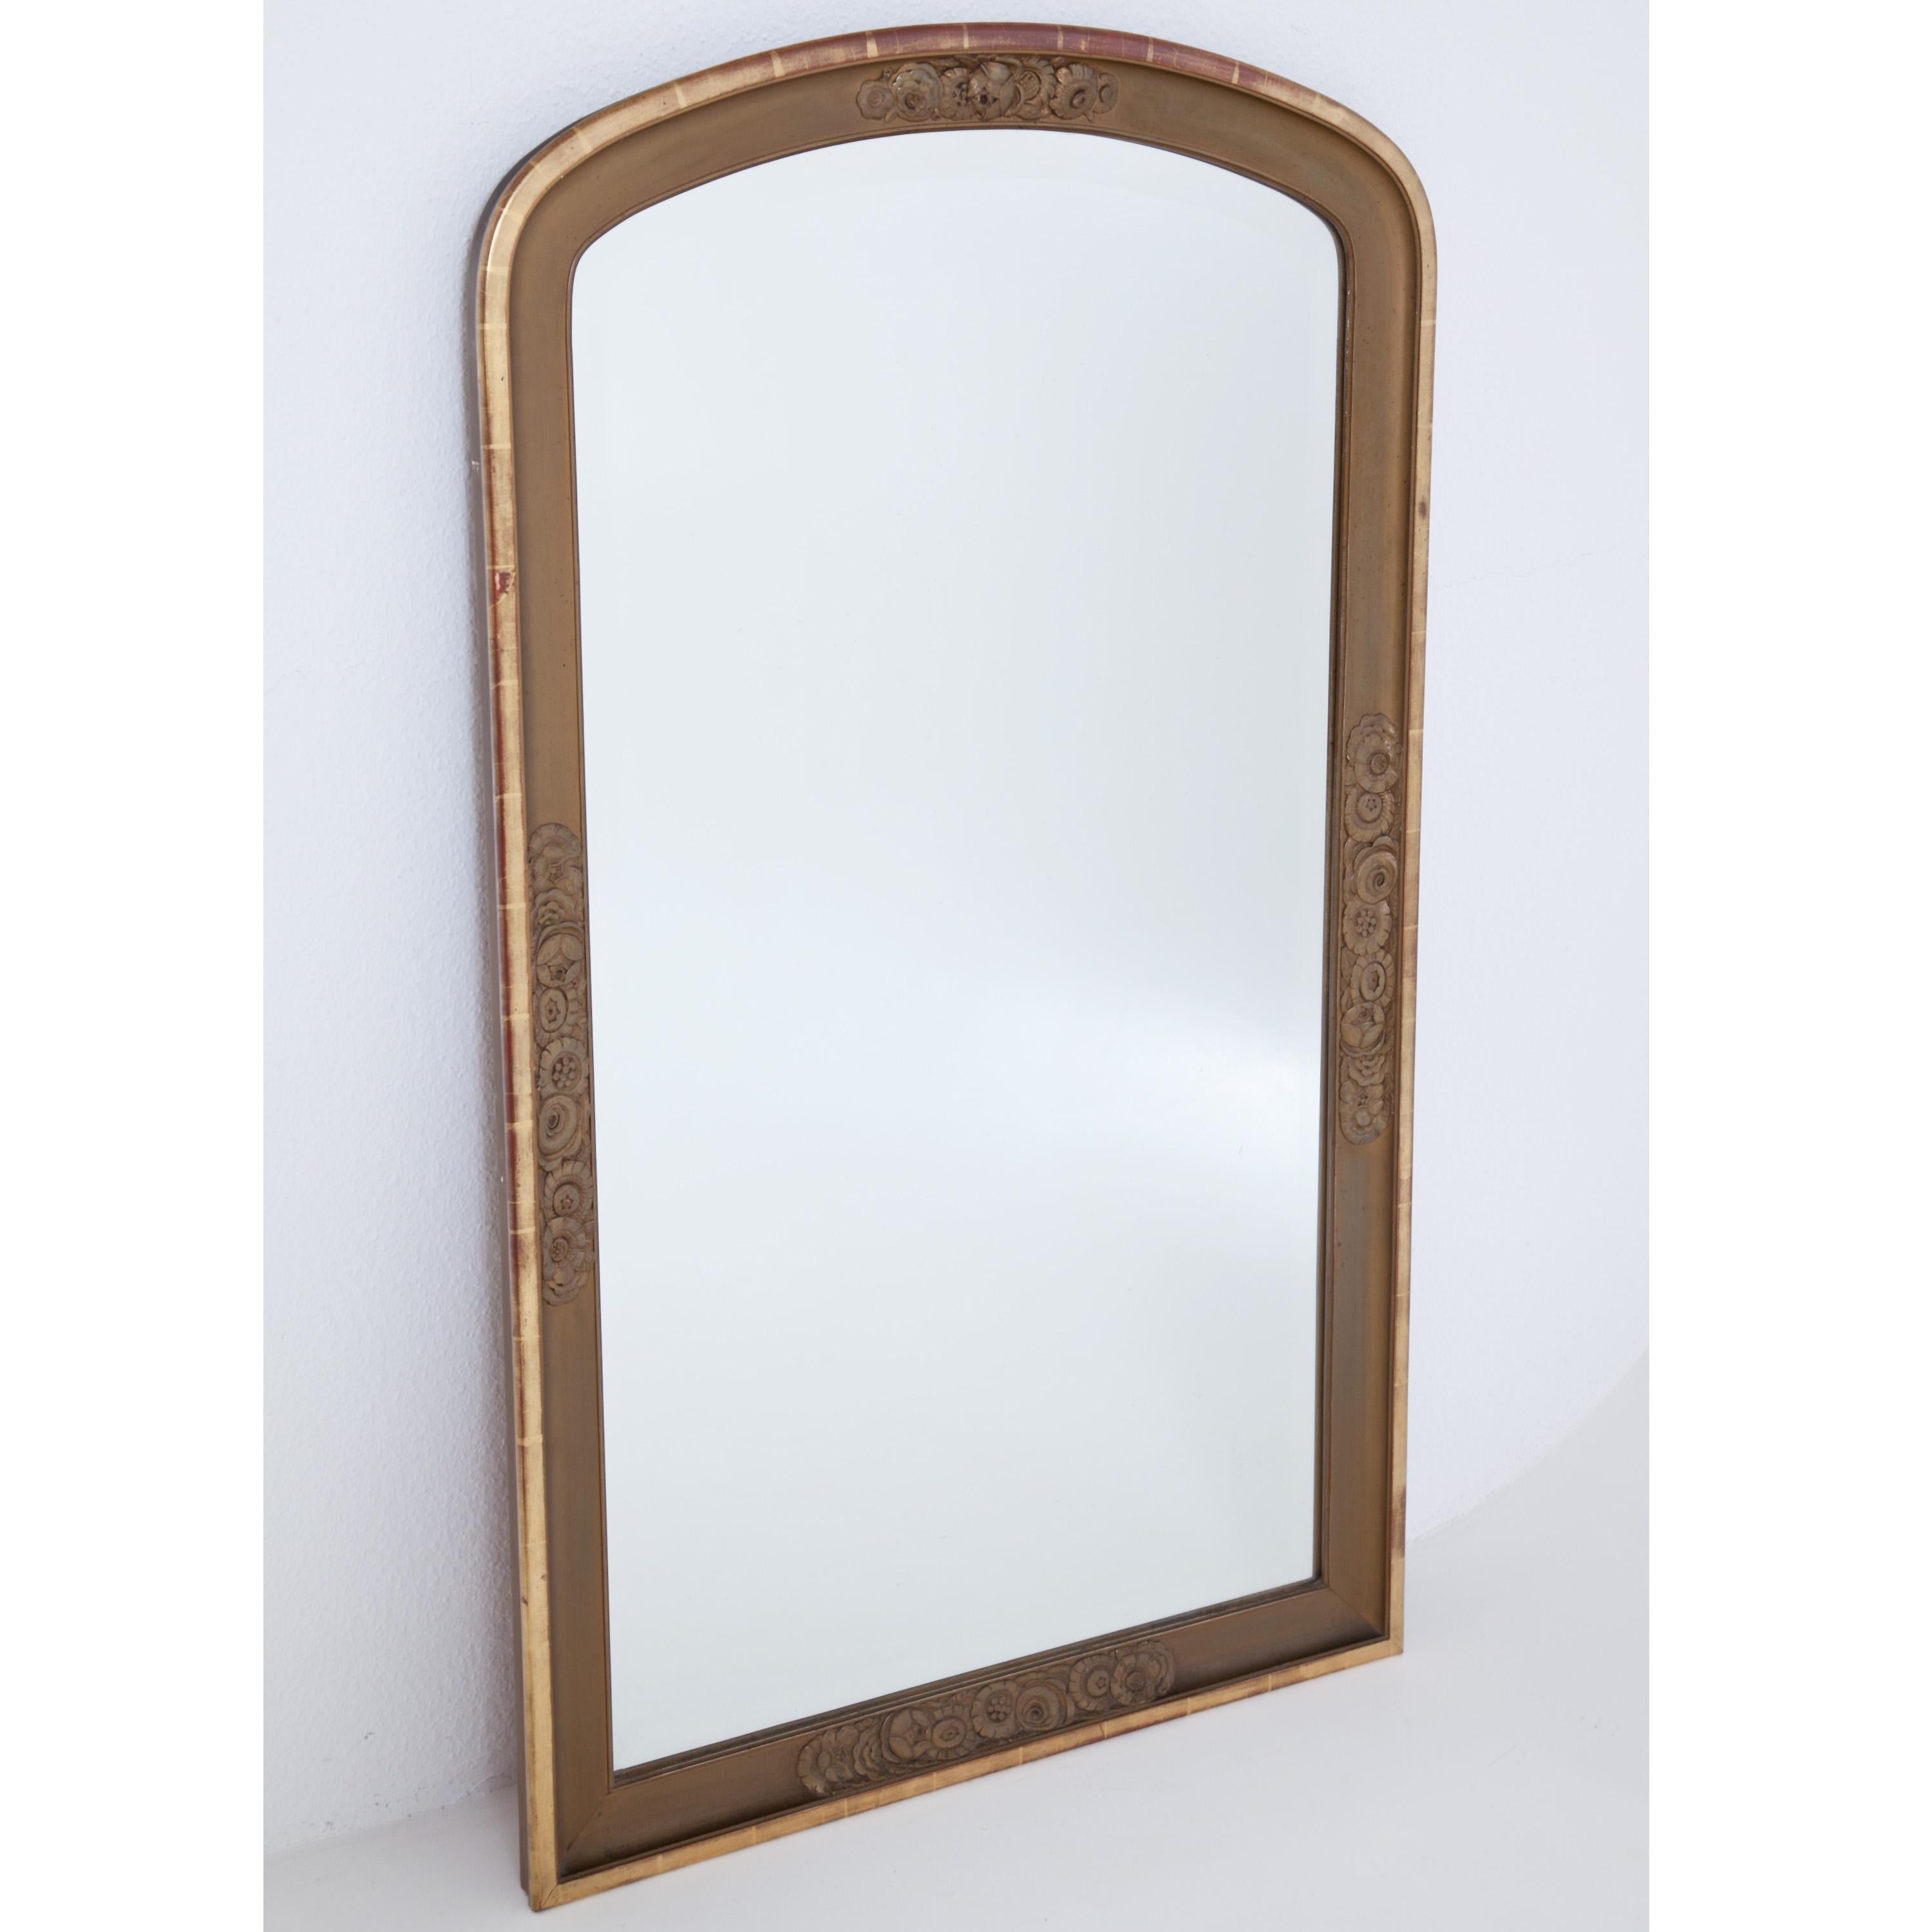 Large wall mirror in Art Deco style. The rounded frame with relief floral decoration. Wood, partly gold patinated.